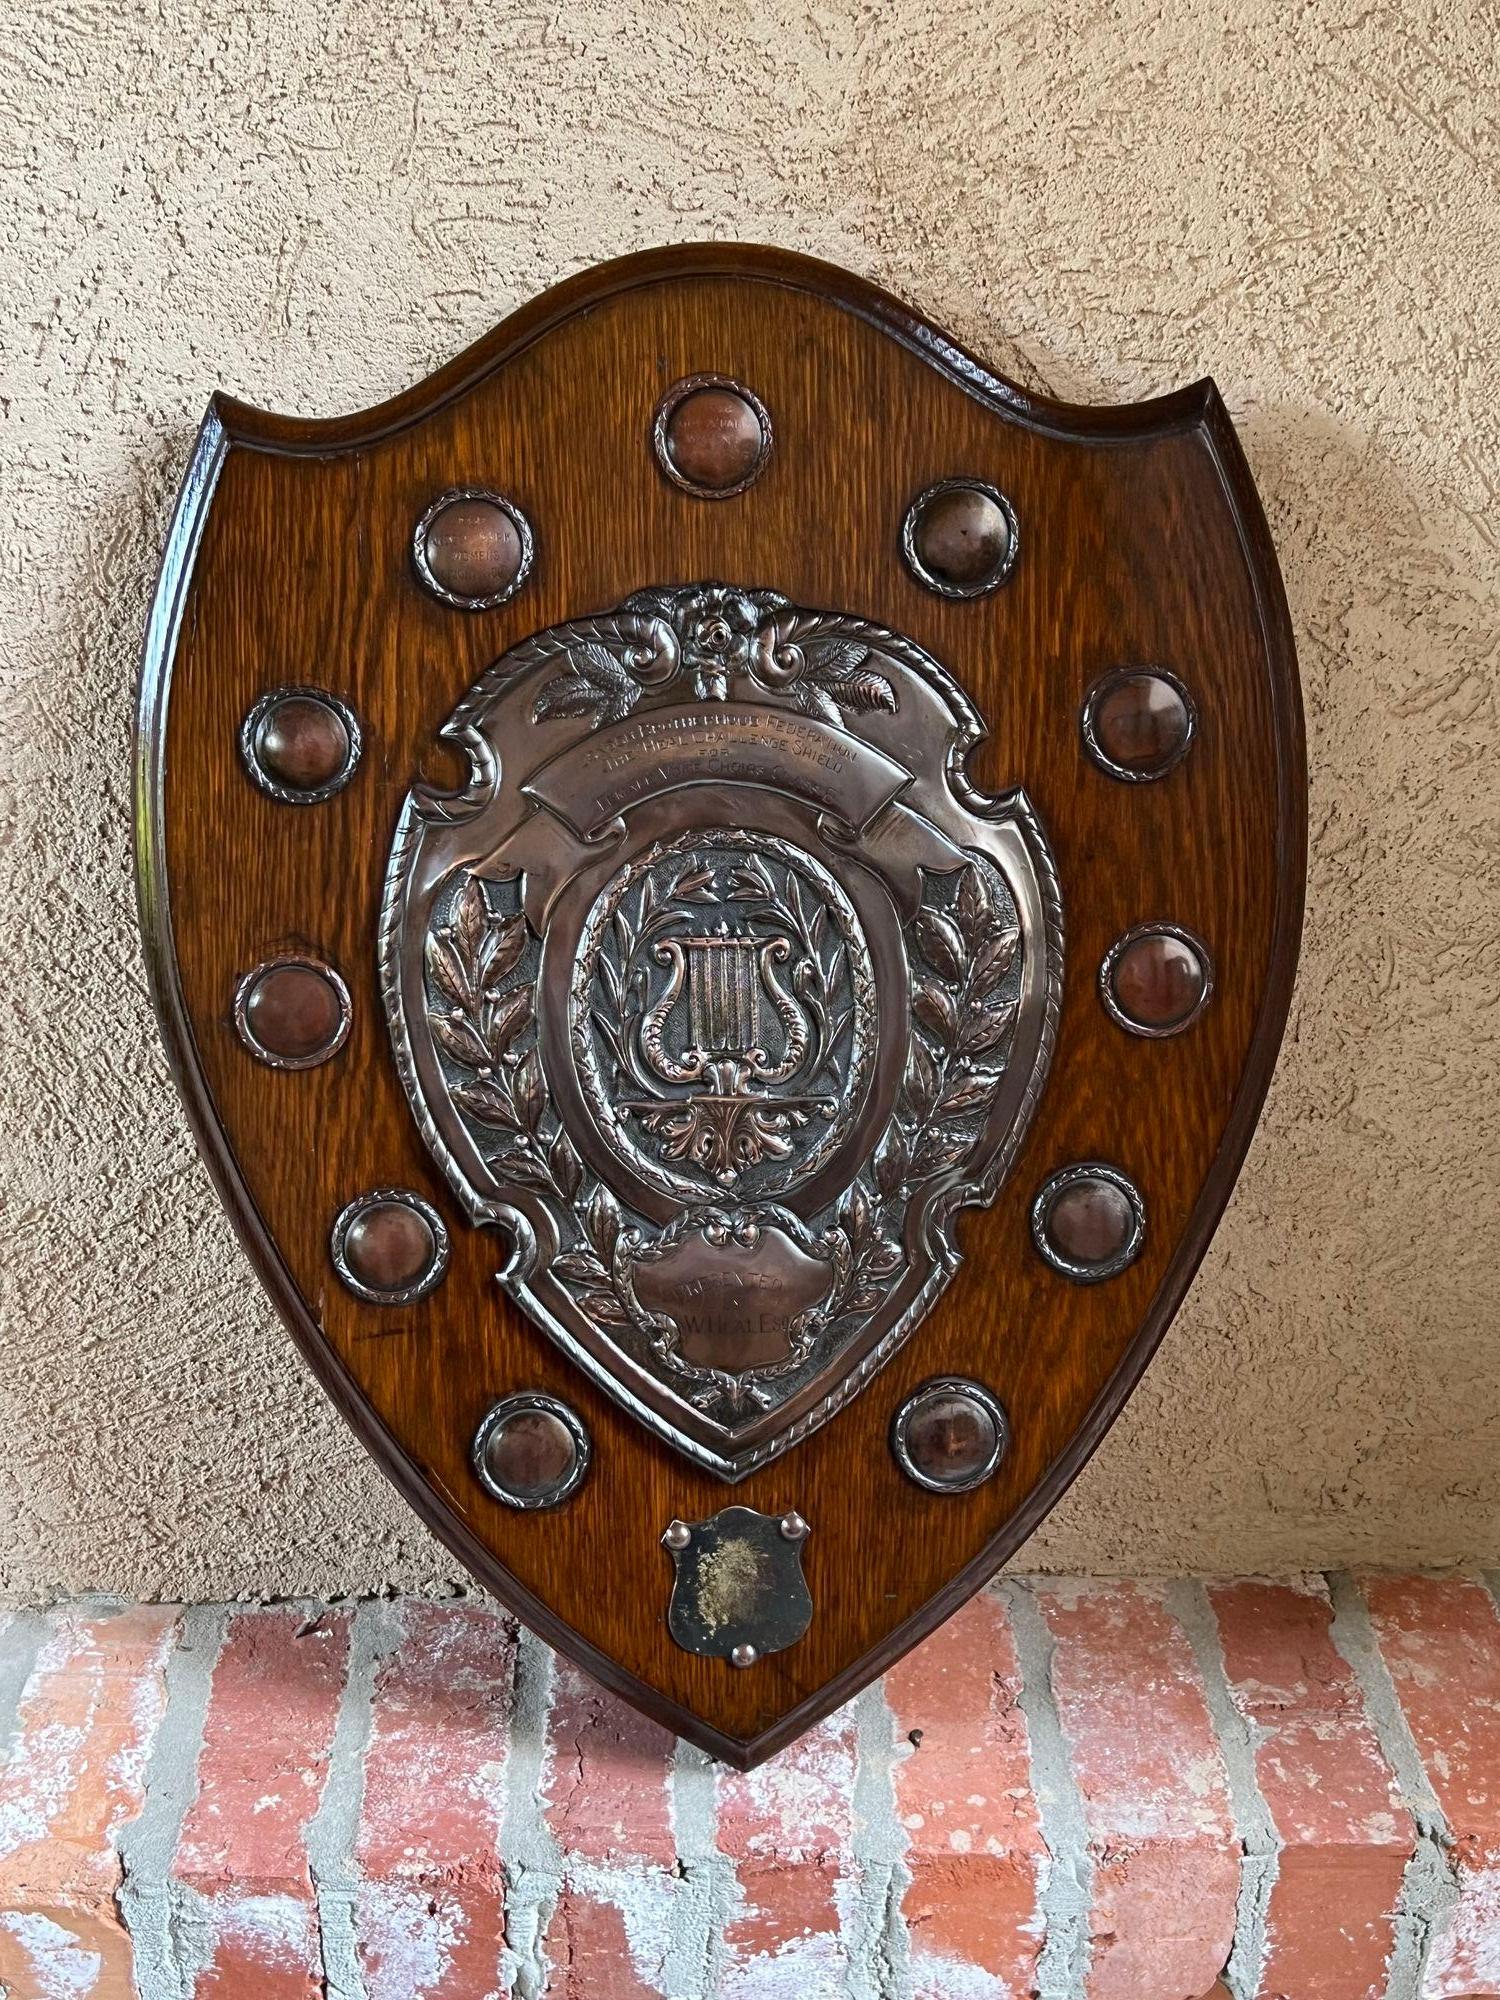 Antique English Choir Trophy Award Plaque Copper Repousse c1938 Lyre Harp.

Direct from England, just arrived in our most recent container, we have several of these one-of-a-kind English trophies that are brimming with provenance, and oh “the